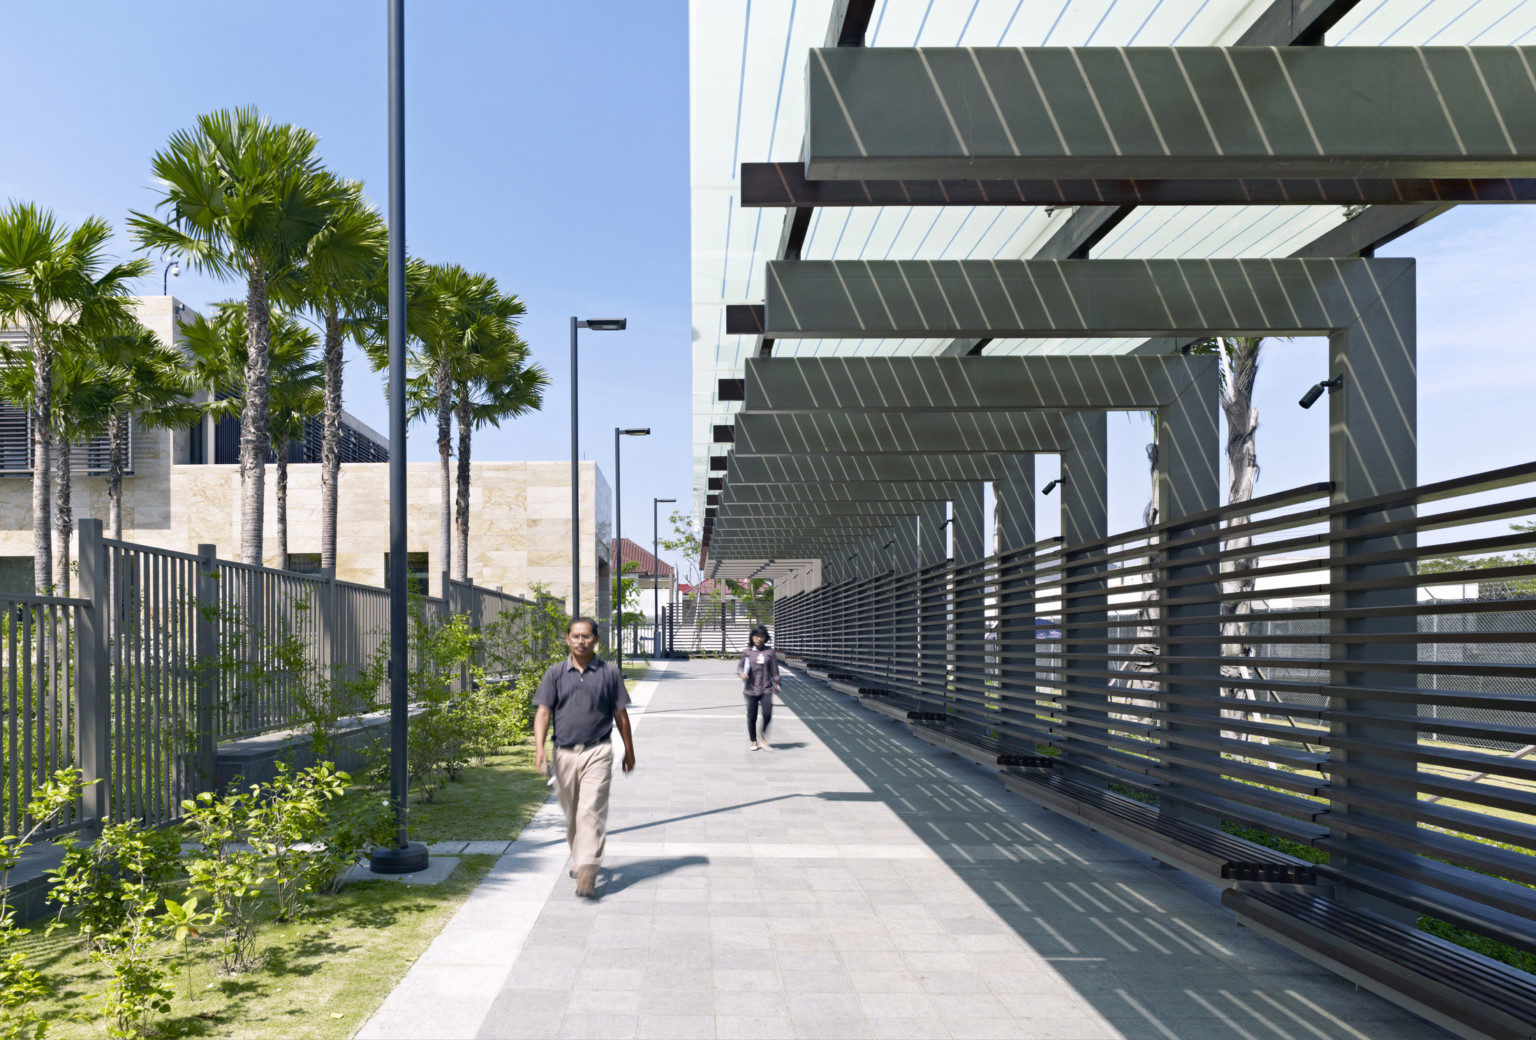 concrete brick path lined with vertical and horizontal fencing. Perimeter has transparent canopy and slatted benches.